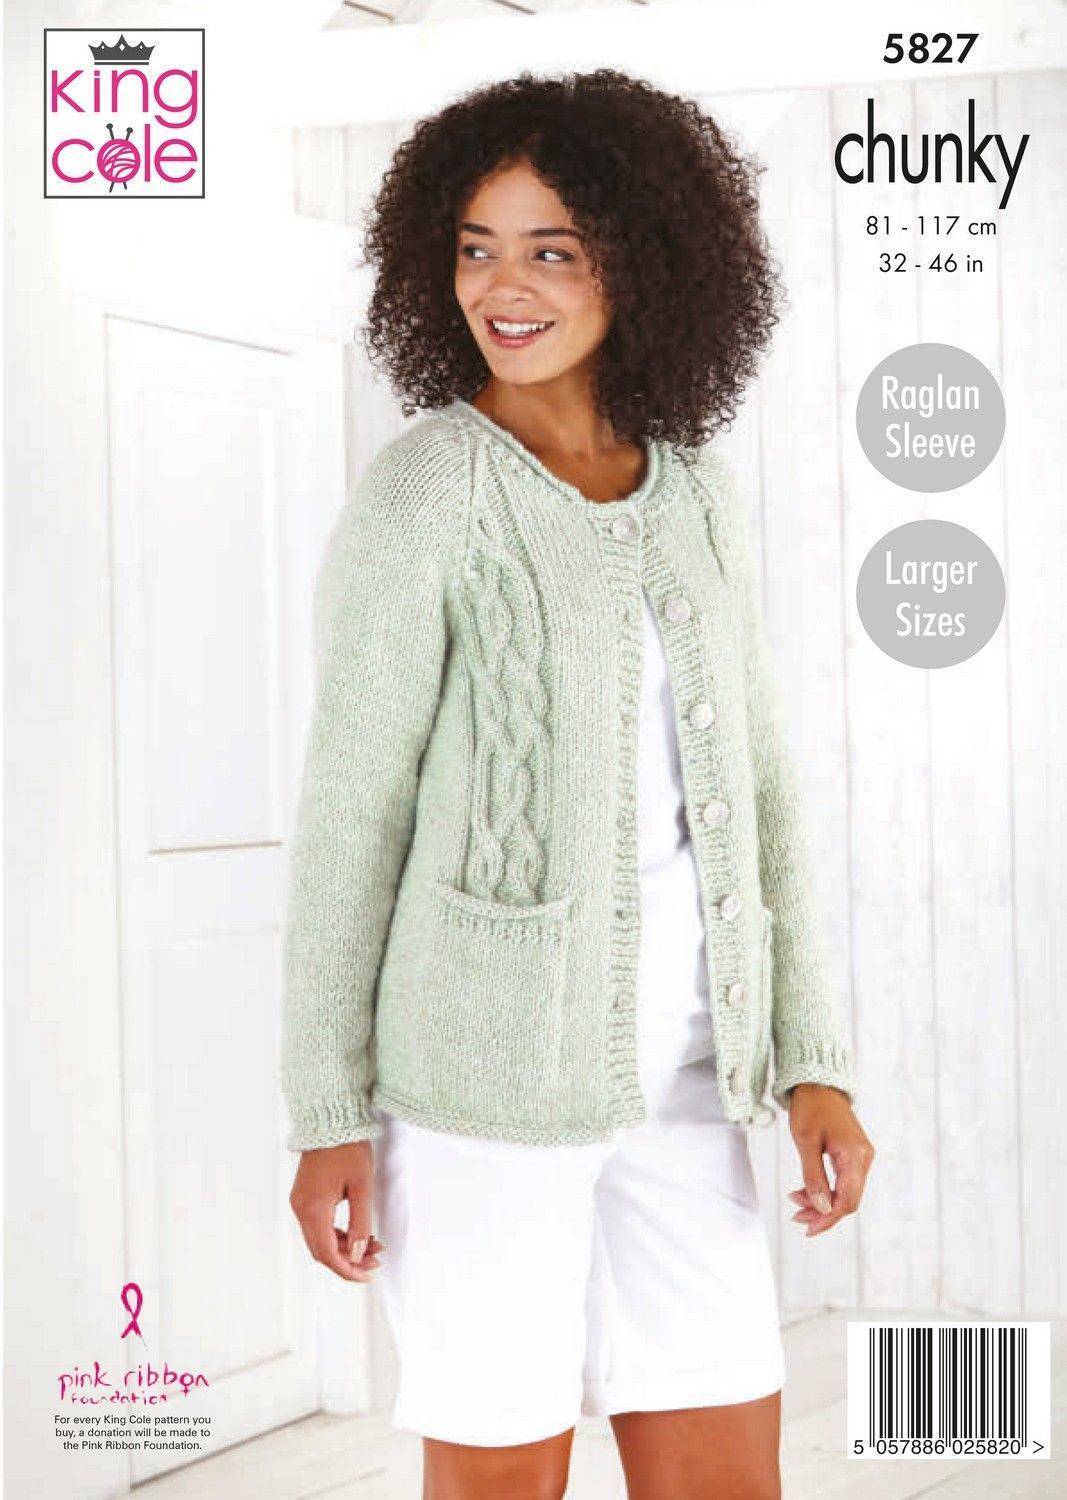 Sweater and Cardigan in King Cole Timeless Chunky (5827) | The Knitting ...